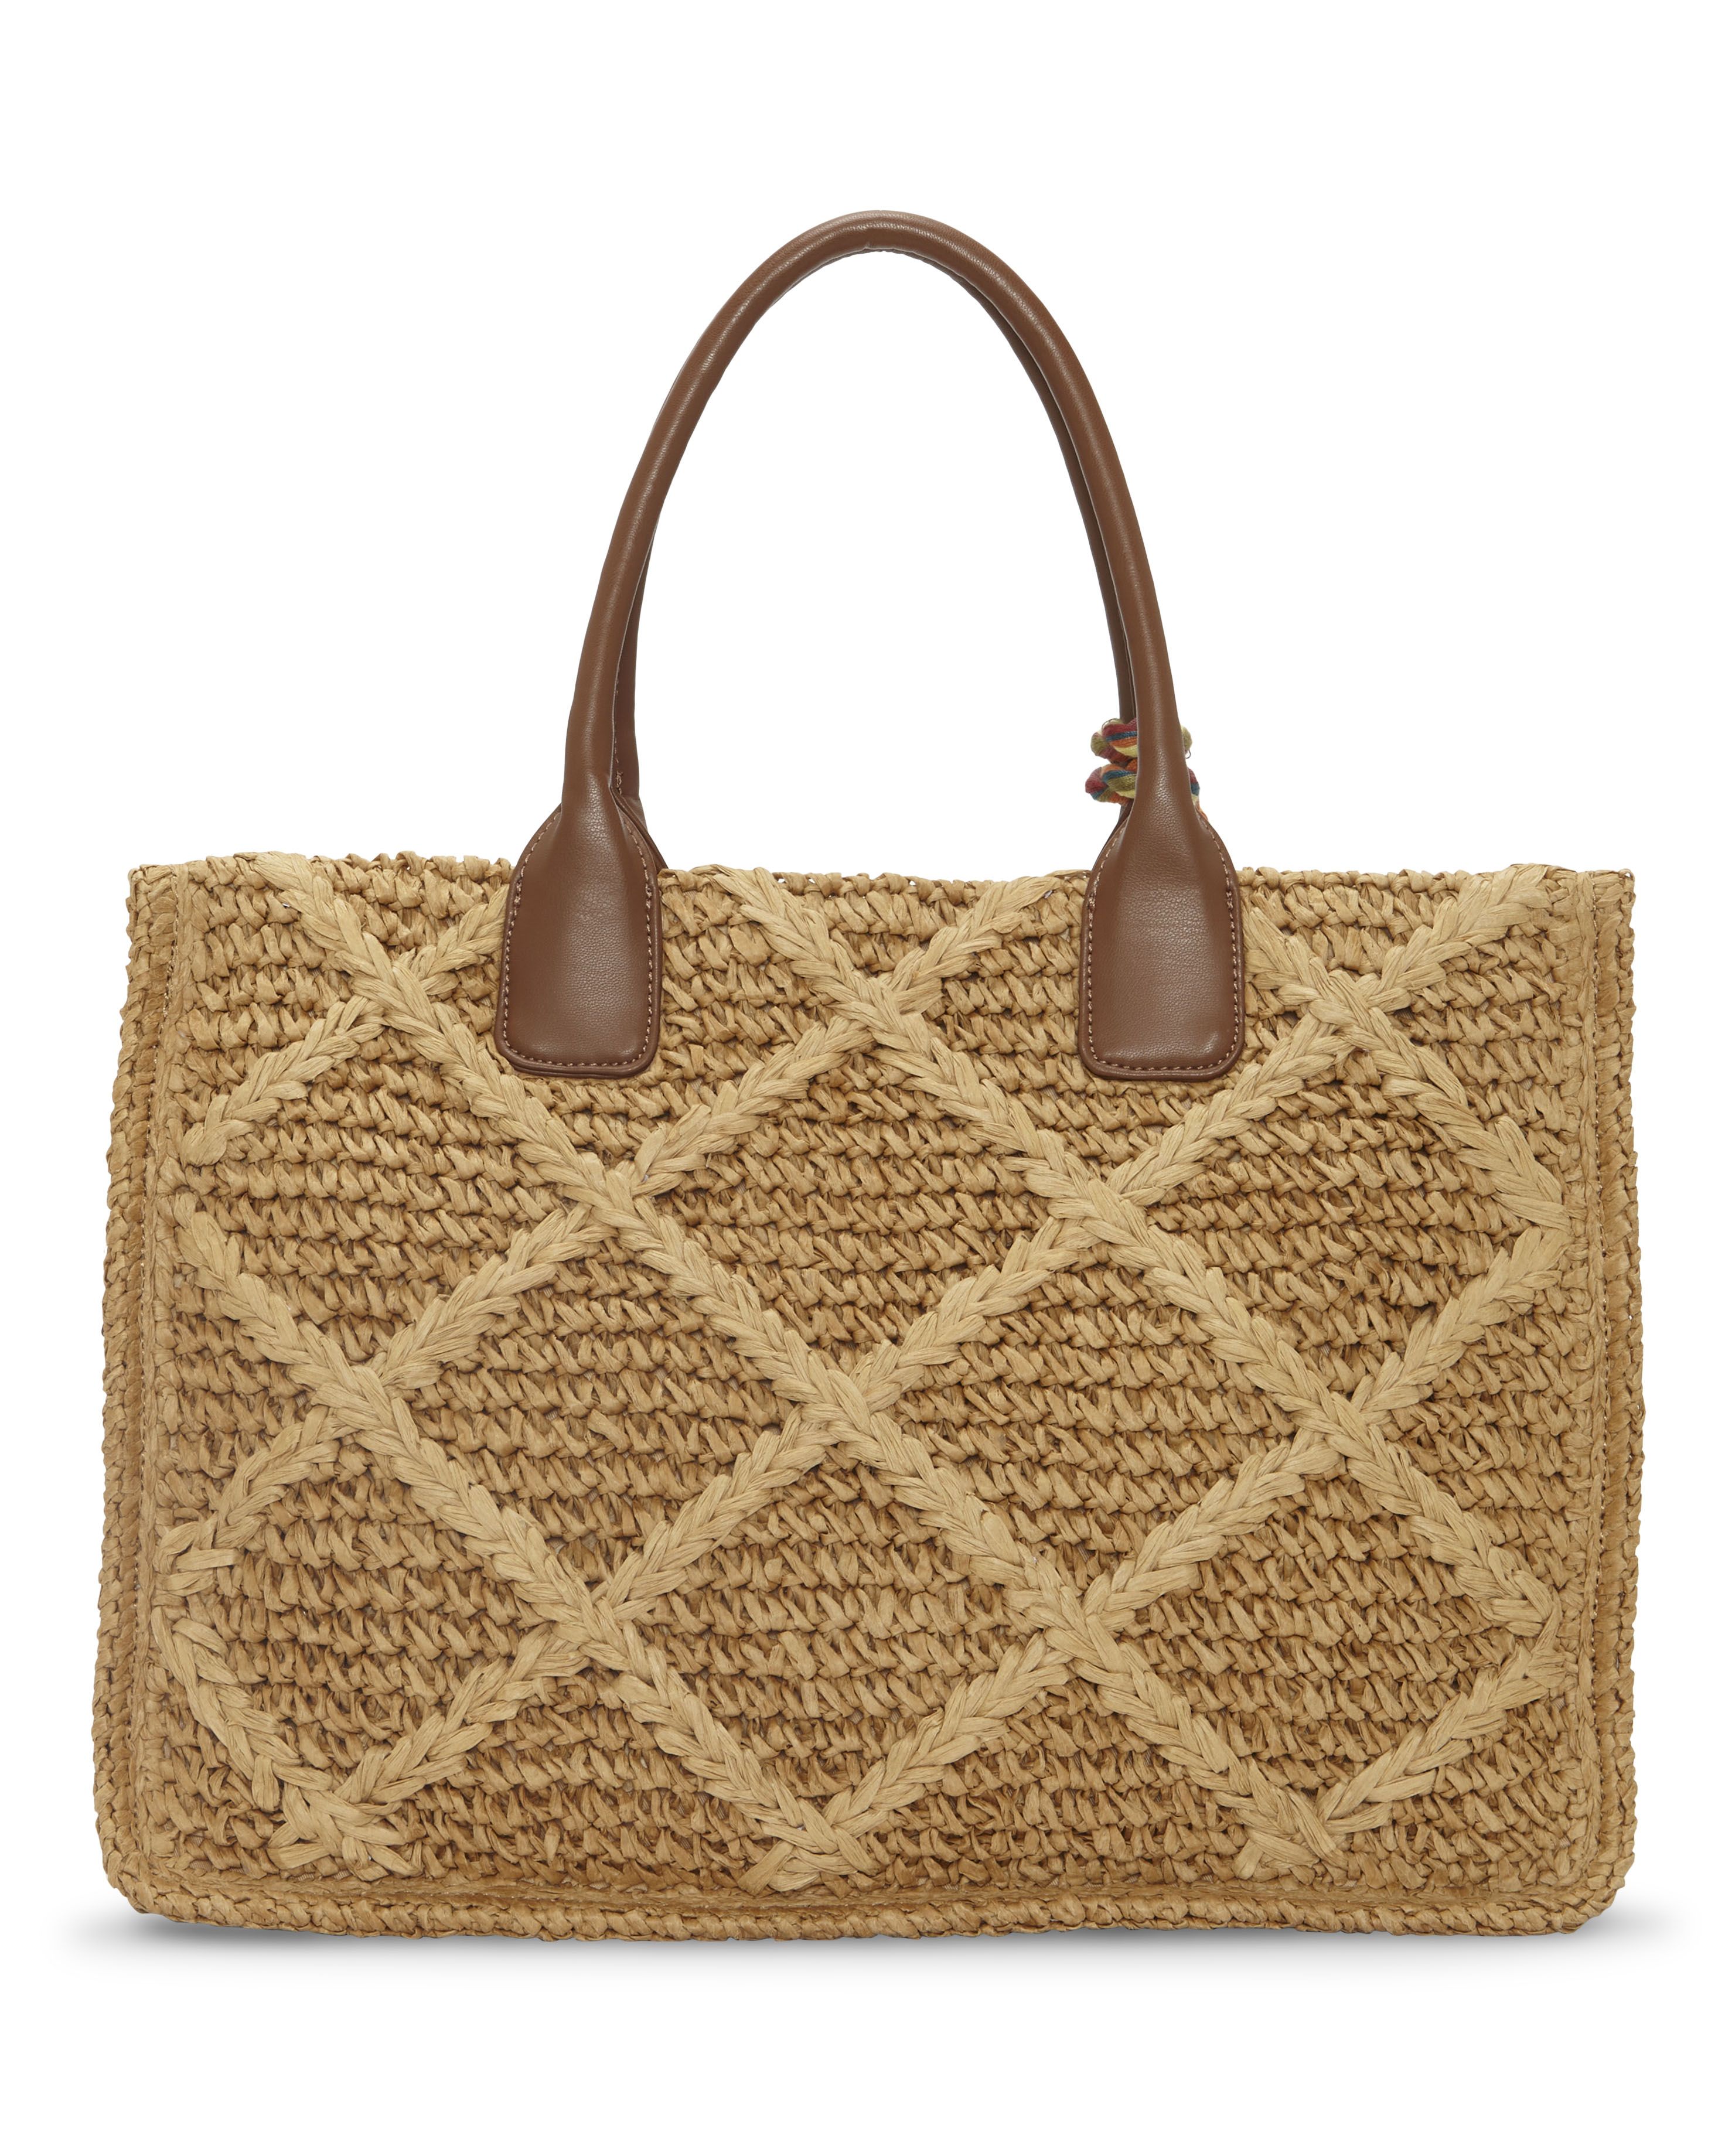 Vince Camuto Orla Straw Tote | Vince Camuto